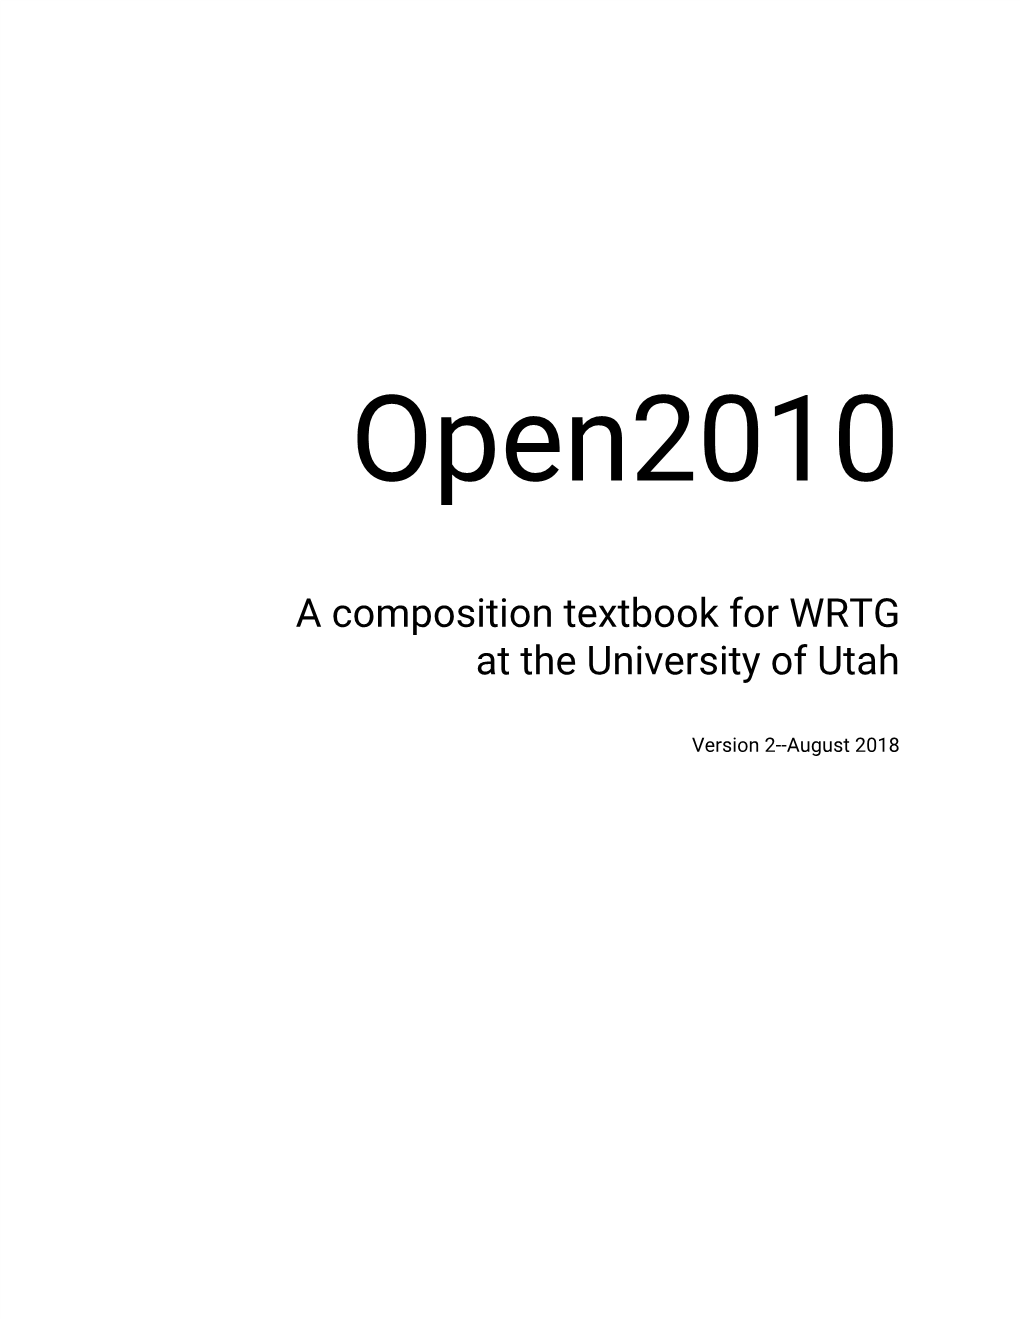 A Composition Textbook for WRTG at the University of Utah